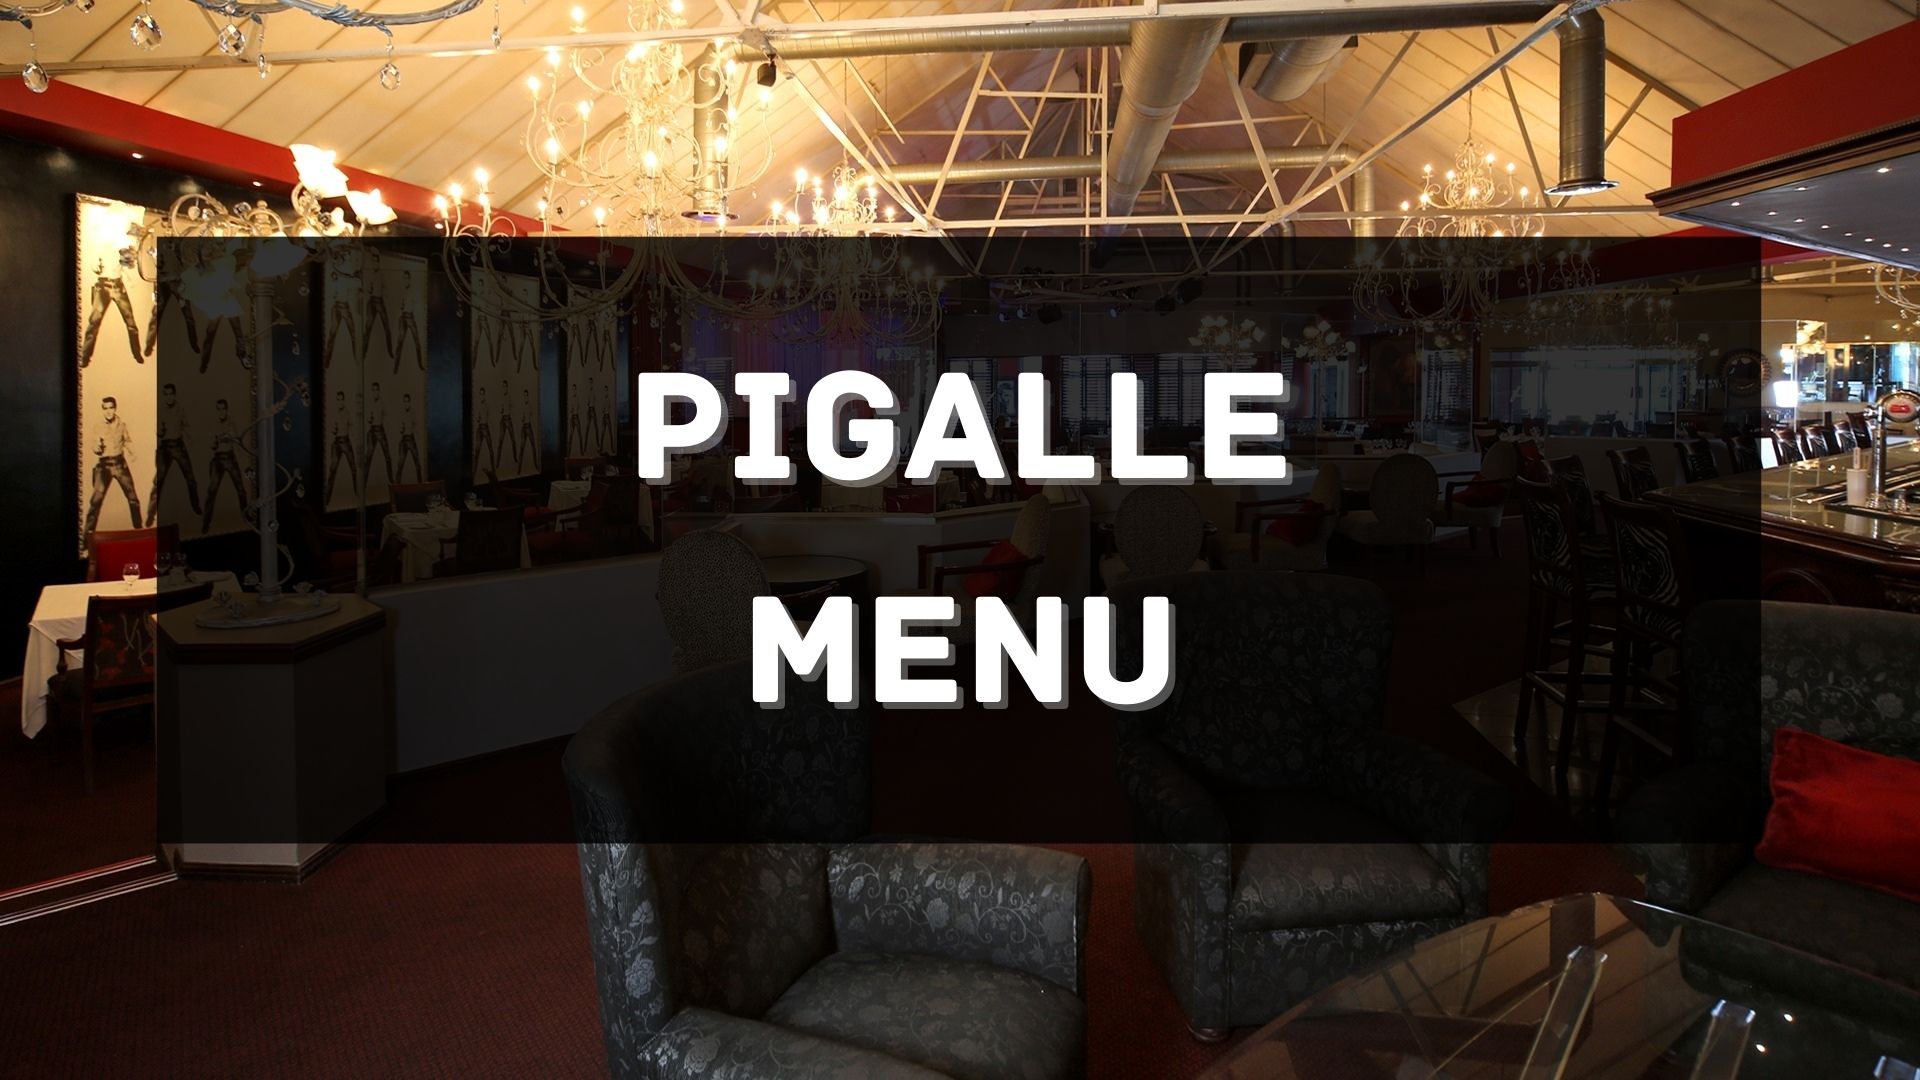 Pigalle Menu South Africa